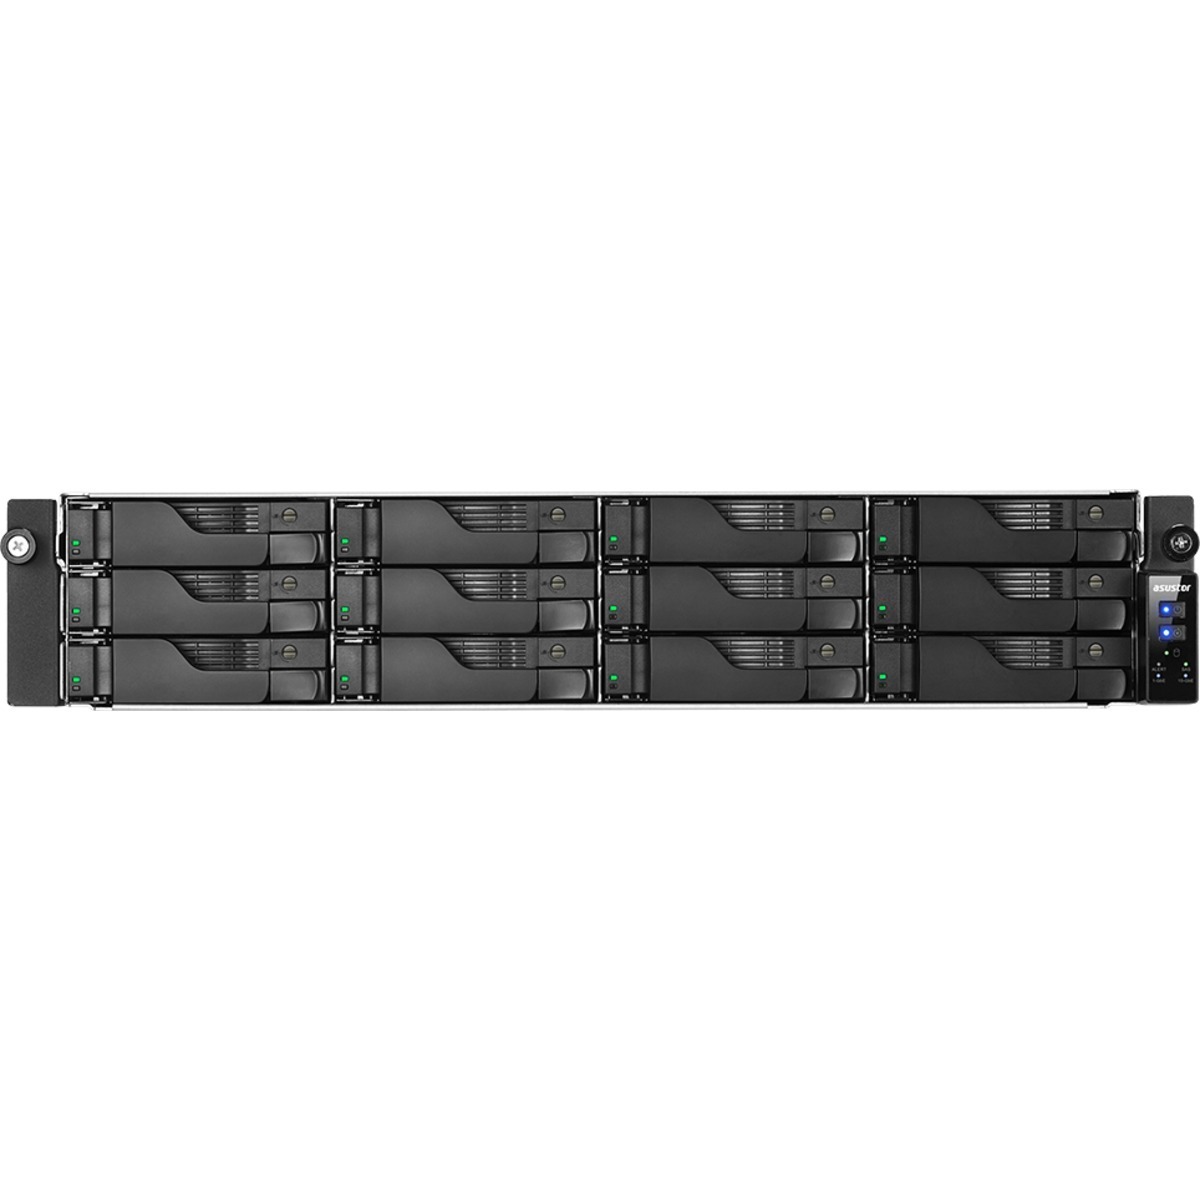 buy $14357 ASUSTOR AS7112RDX Lockerstor 12R Pro 96tb RackMount NAS - Network Attached Storage Device 12x8000gb Samsung 870 QVO MZ-77Q8T0 2.5 SATA 6Gb/s SSD CONSUMER Class Drives Installed - Burn-In Tested - nas headquarters buy network attached storage server device das new raid-5 free shipping usa christmas new year holiday sale AS7112RDX Lockerstor 12R Pro